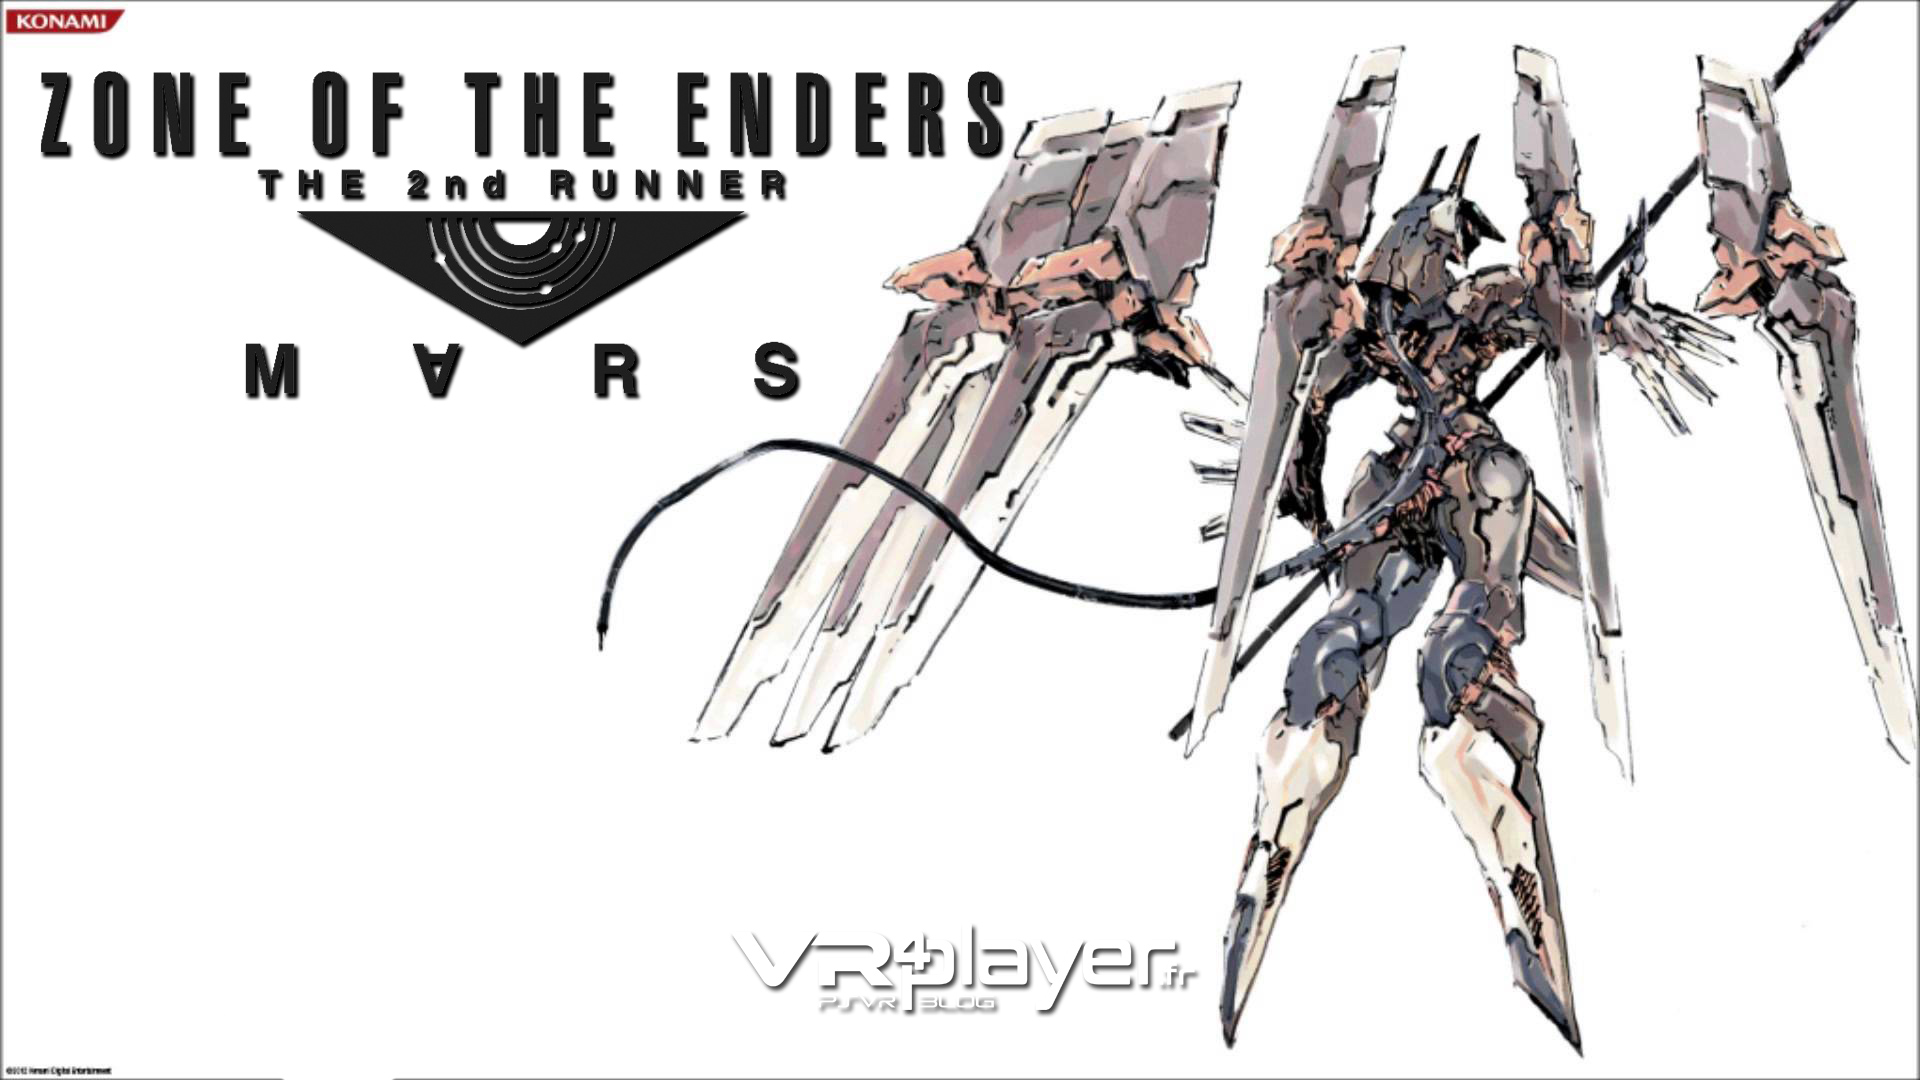 Playstation Vr Ps4 Zone Of The Enders March 2 Runner Available On